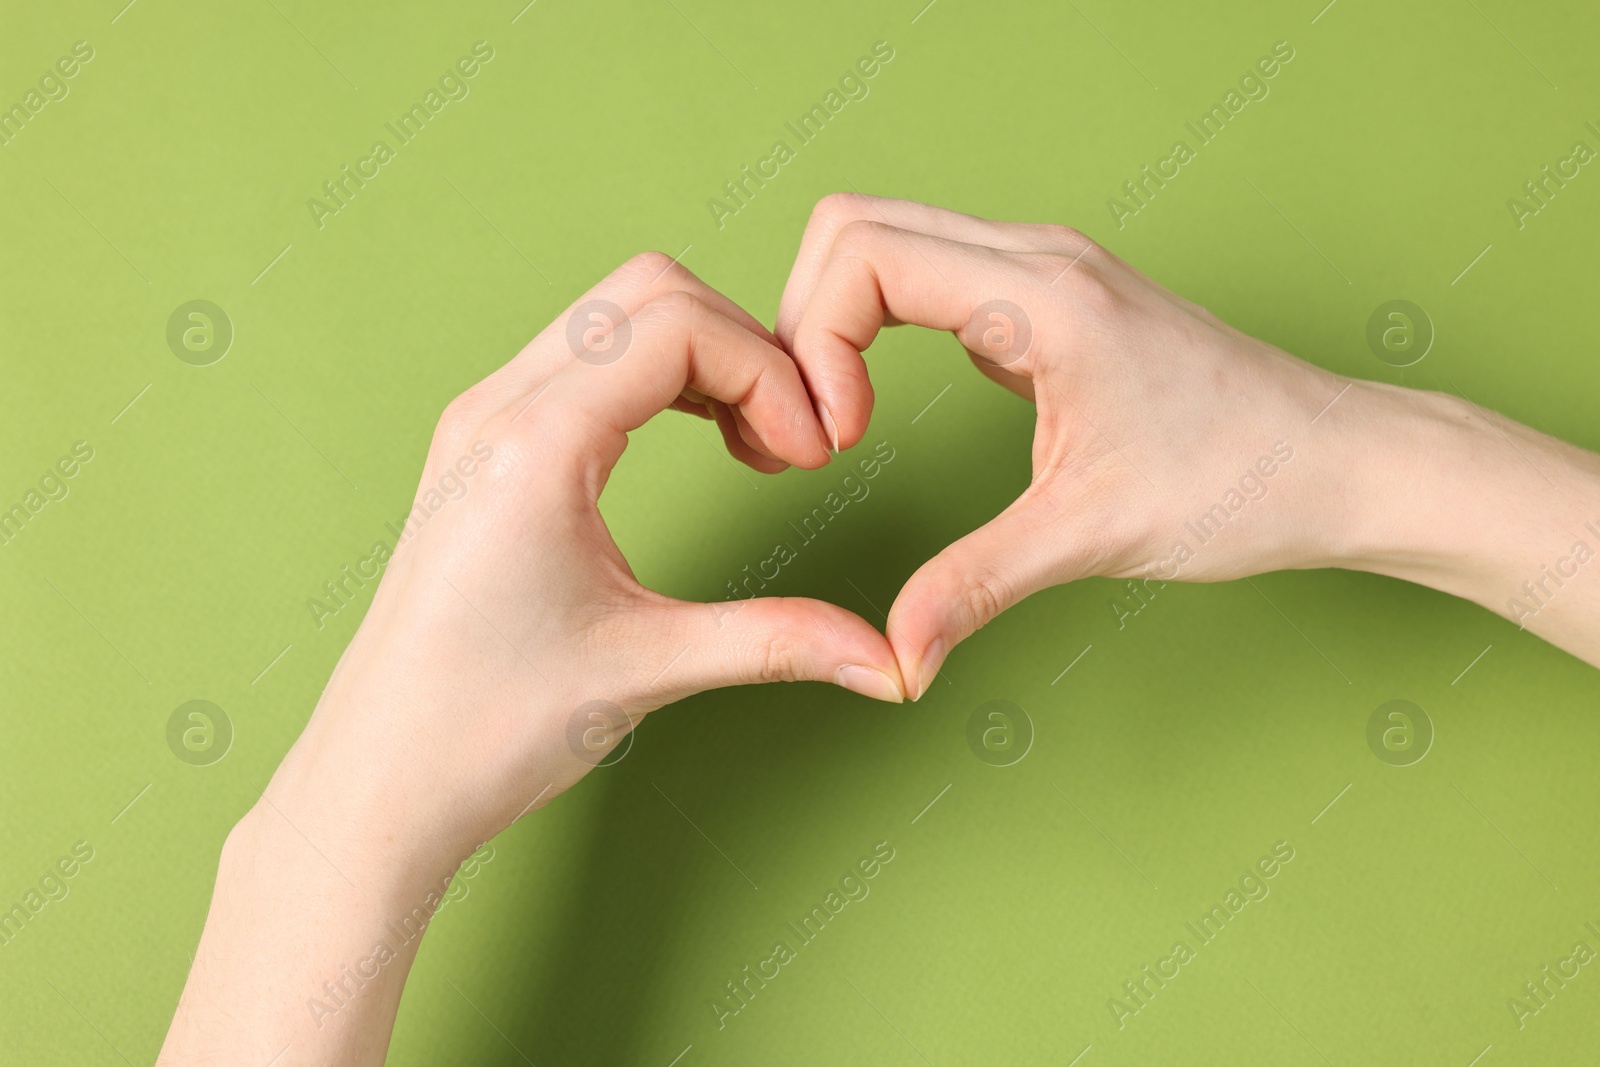 Photo of Woman showing heart gesture with hands on green background, closeup